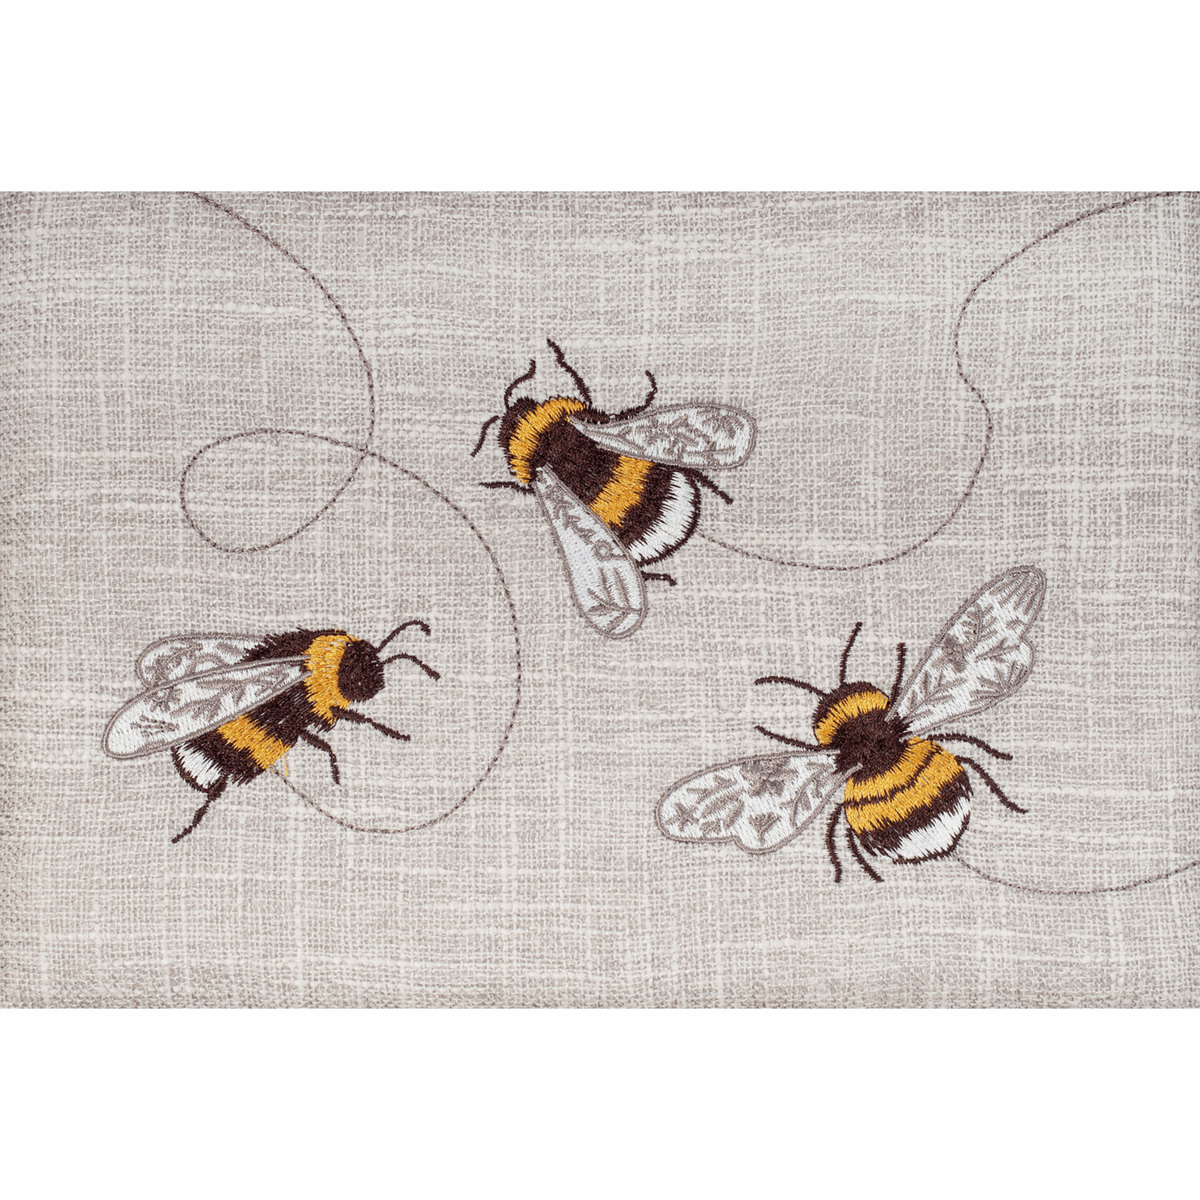 Sewing Box Embroidered Bees